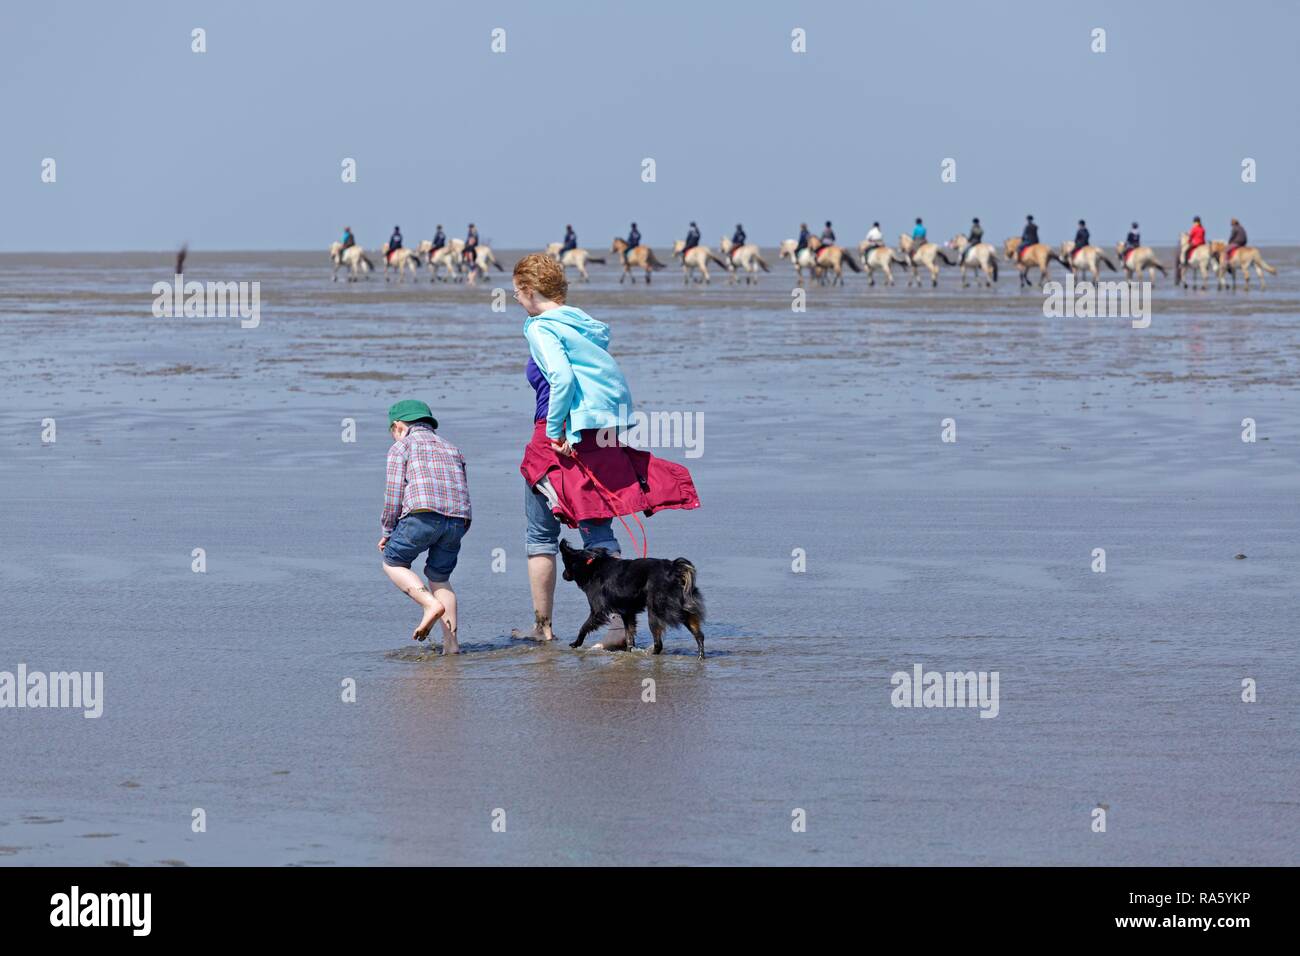 Woman, child and a dog walking through the mudflats with a row of horseriders at the rear, Duhnen, Cuxhaven, Lower Saxony Stock Photo